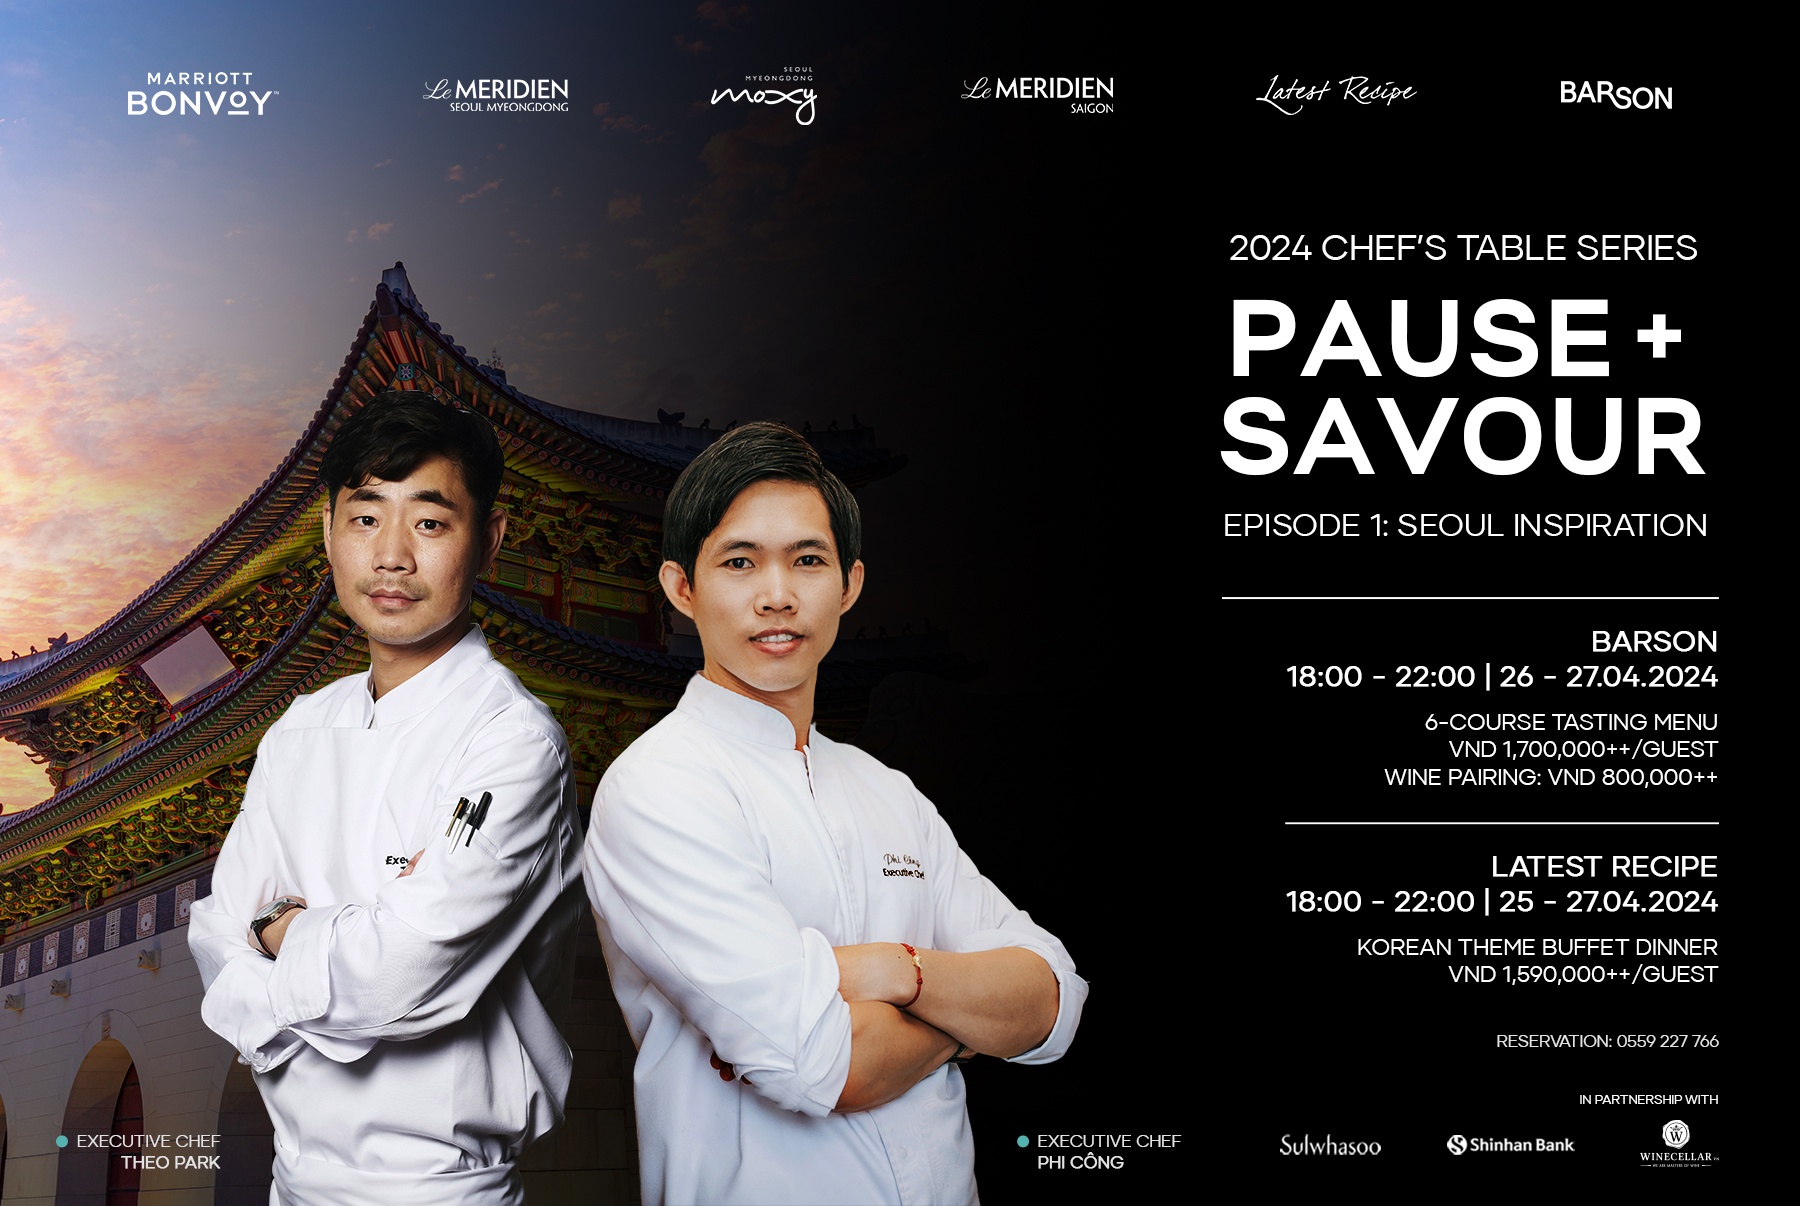 le meridien saigon launches new series of chefs table